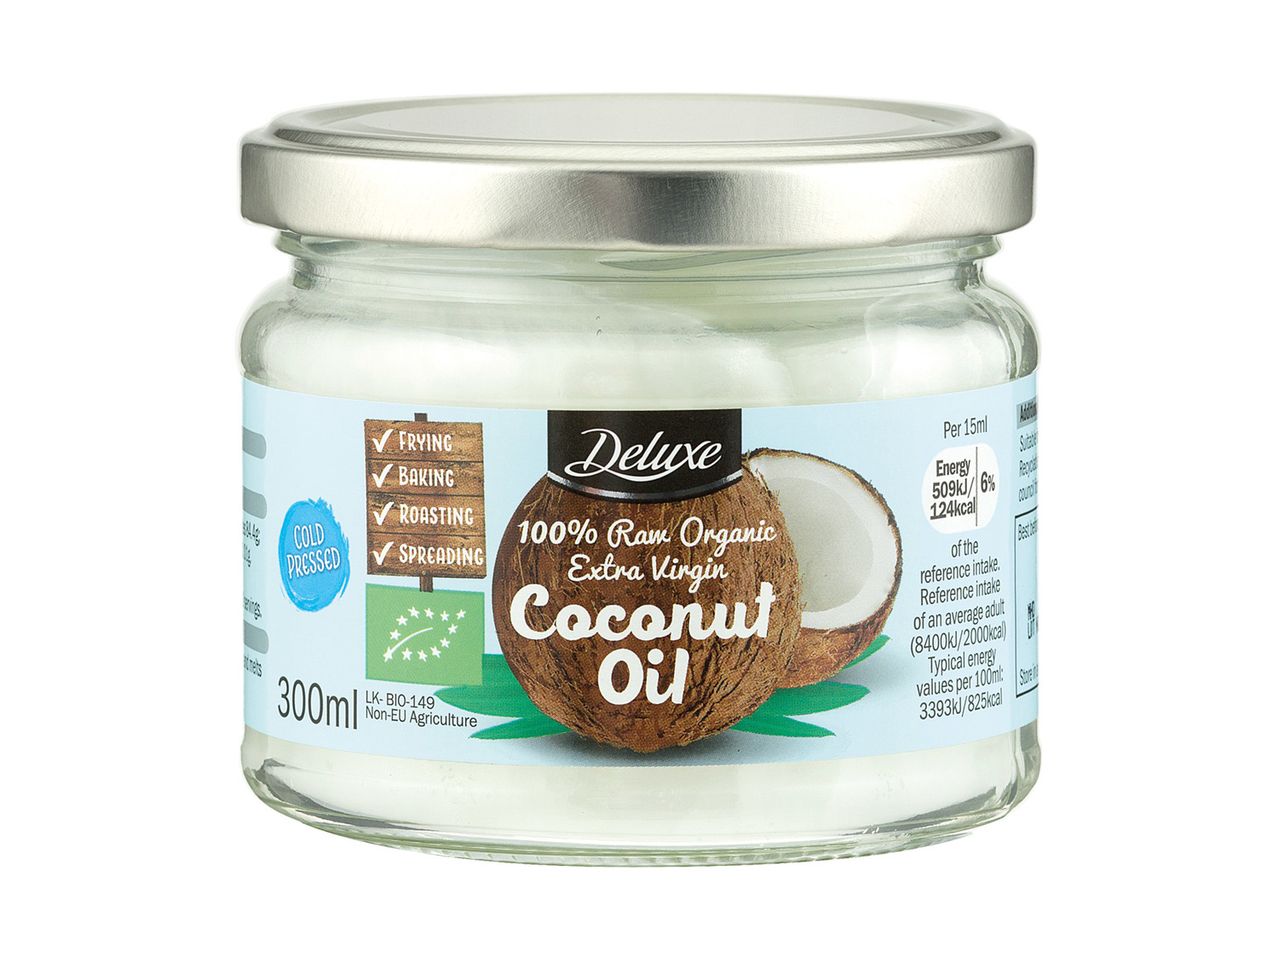 Go to full screen view: Deluxe Organic Coconut Oil - Image 1